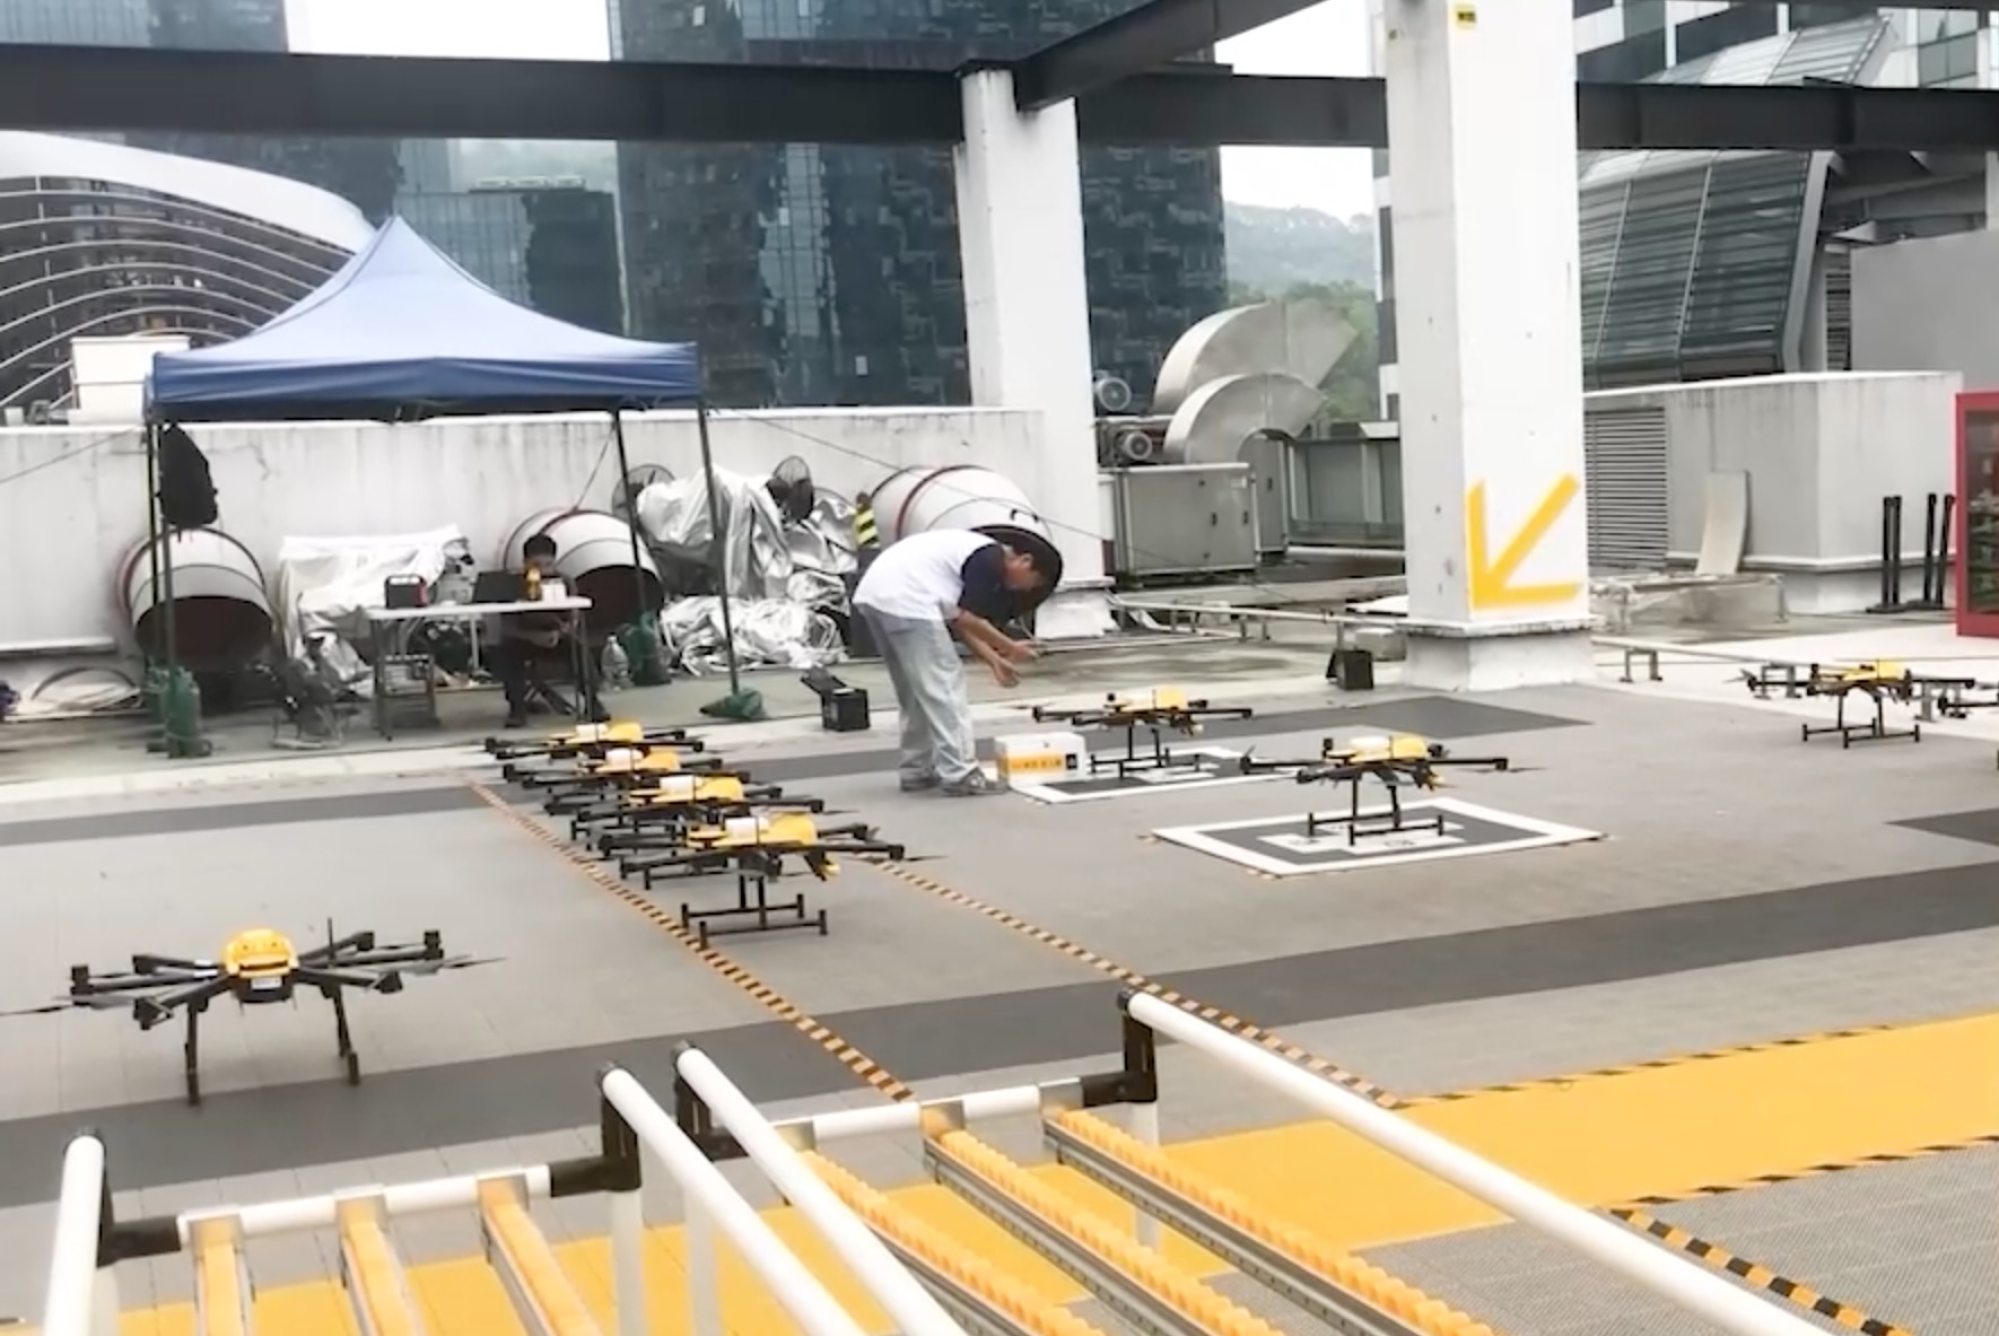 Meituan’s delivery drones in Shenzhen are stationed at one of five depots, including this one atop a large shopping mall. Photo: Zeyi Yang